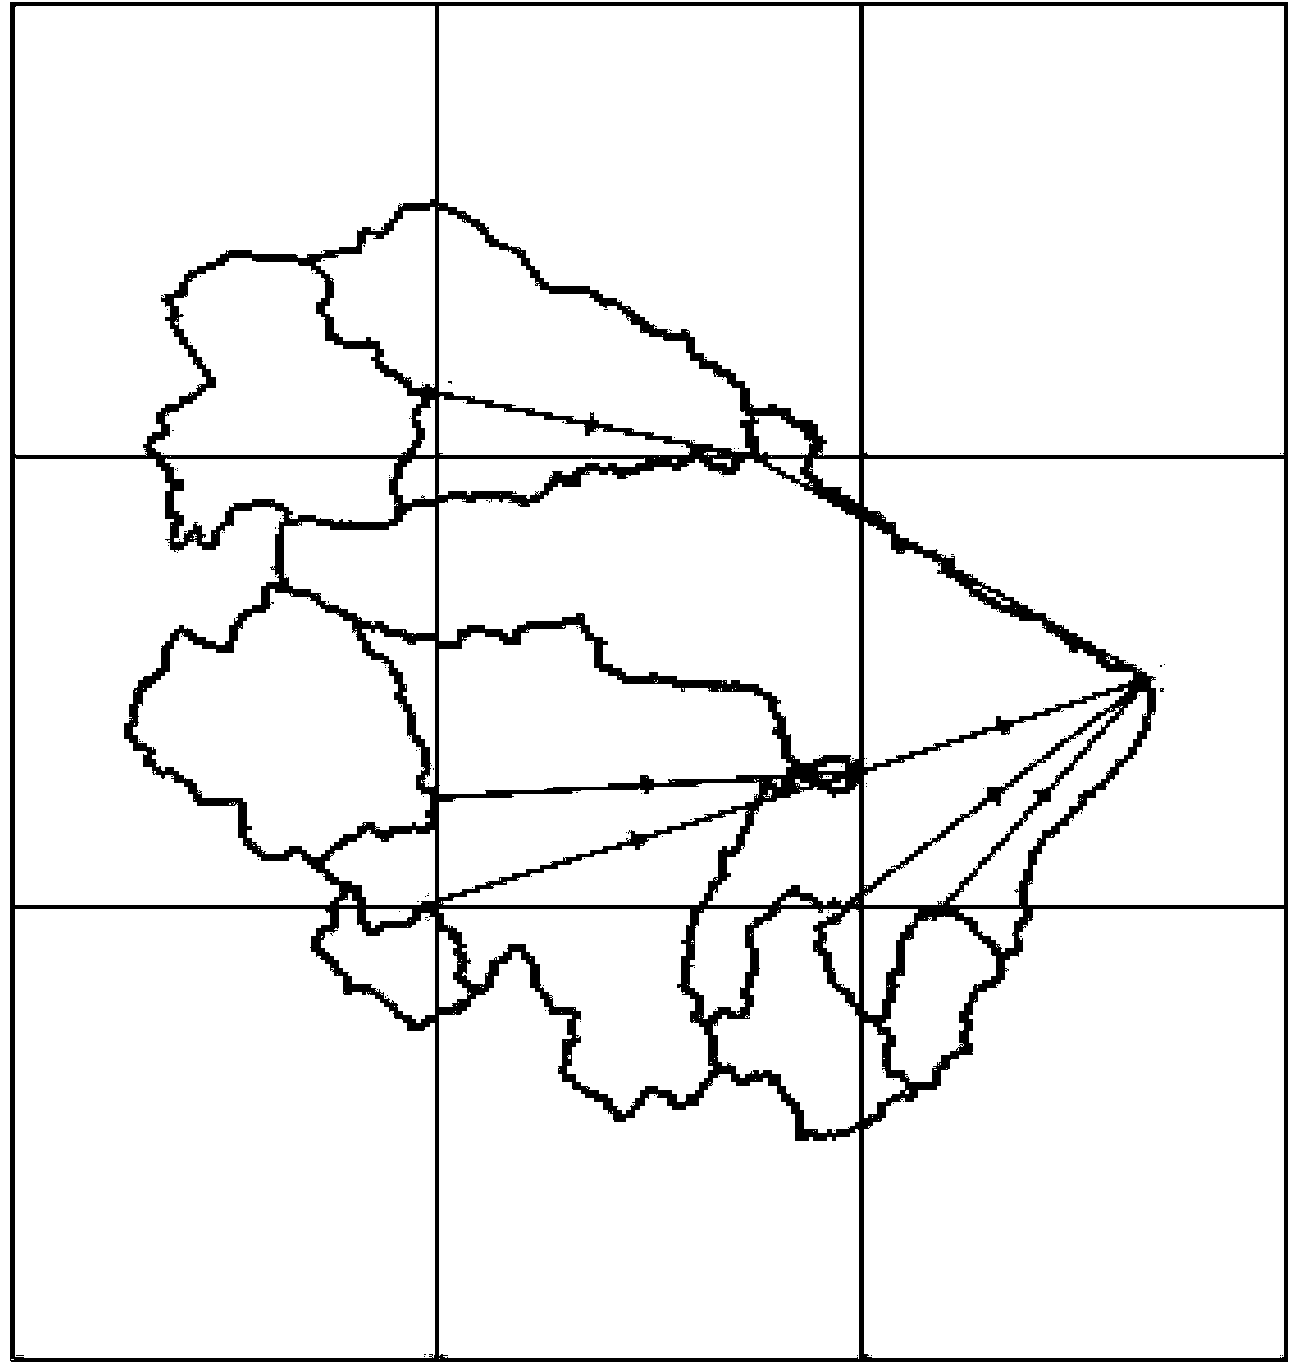 Sub-basin dividing and information extracting method based on IDL and Mapinfo